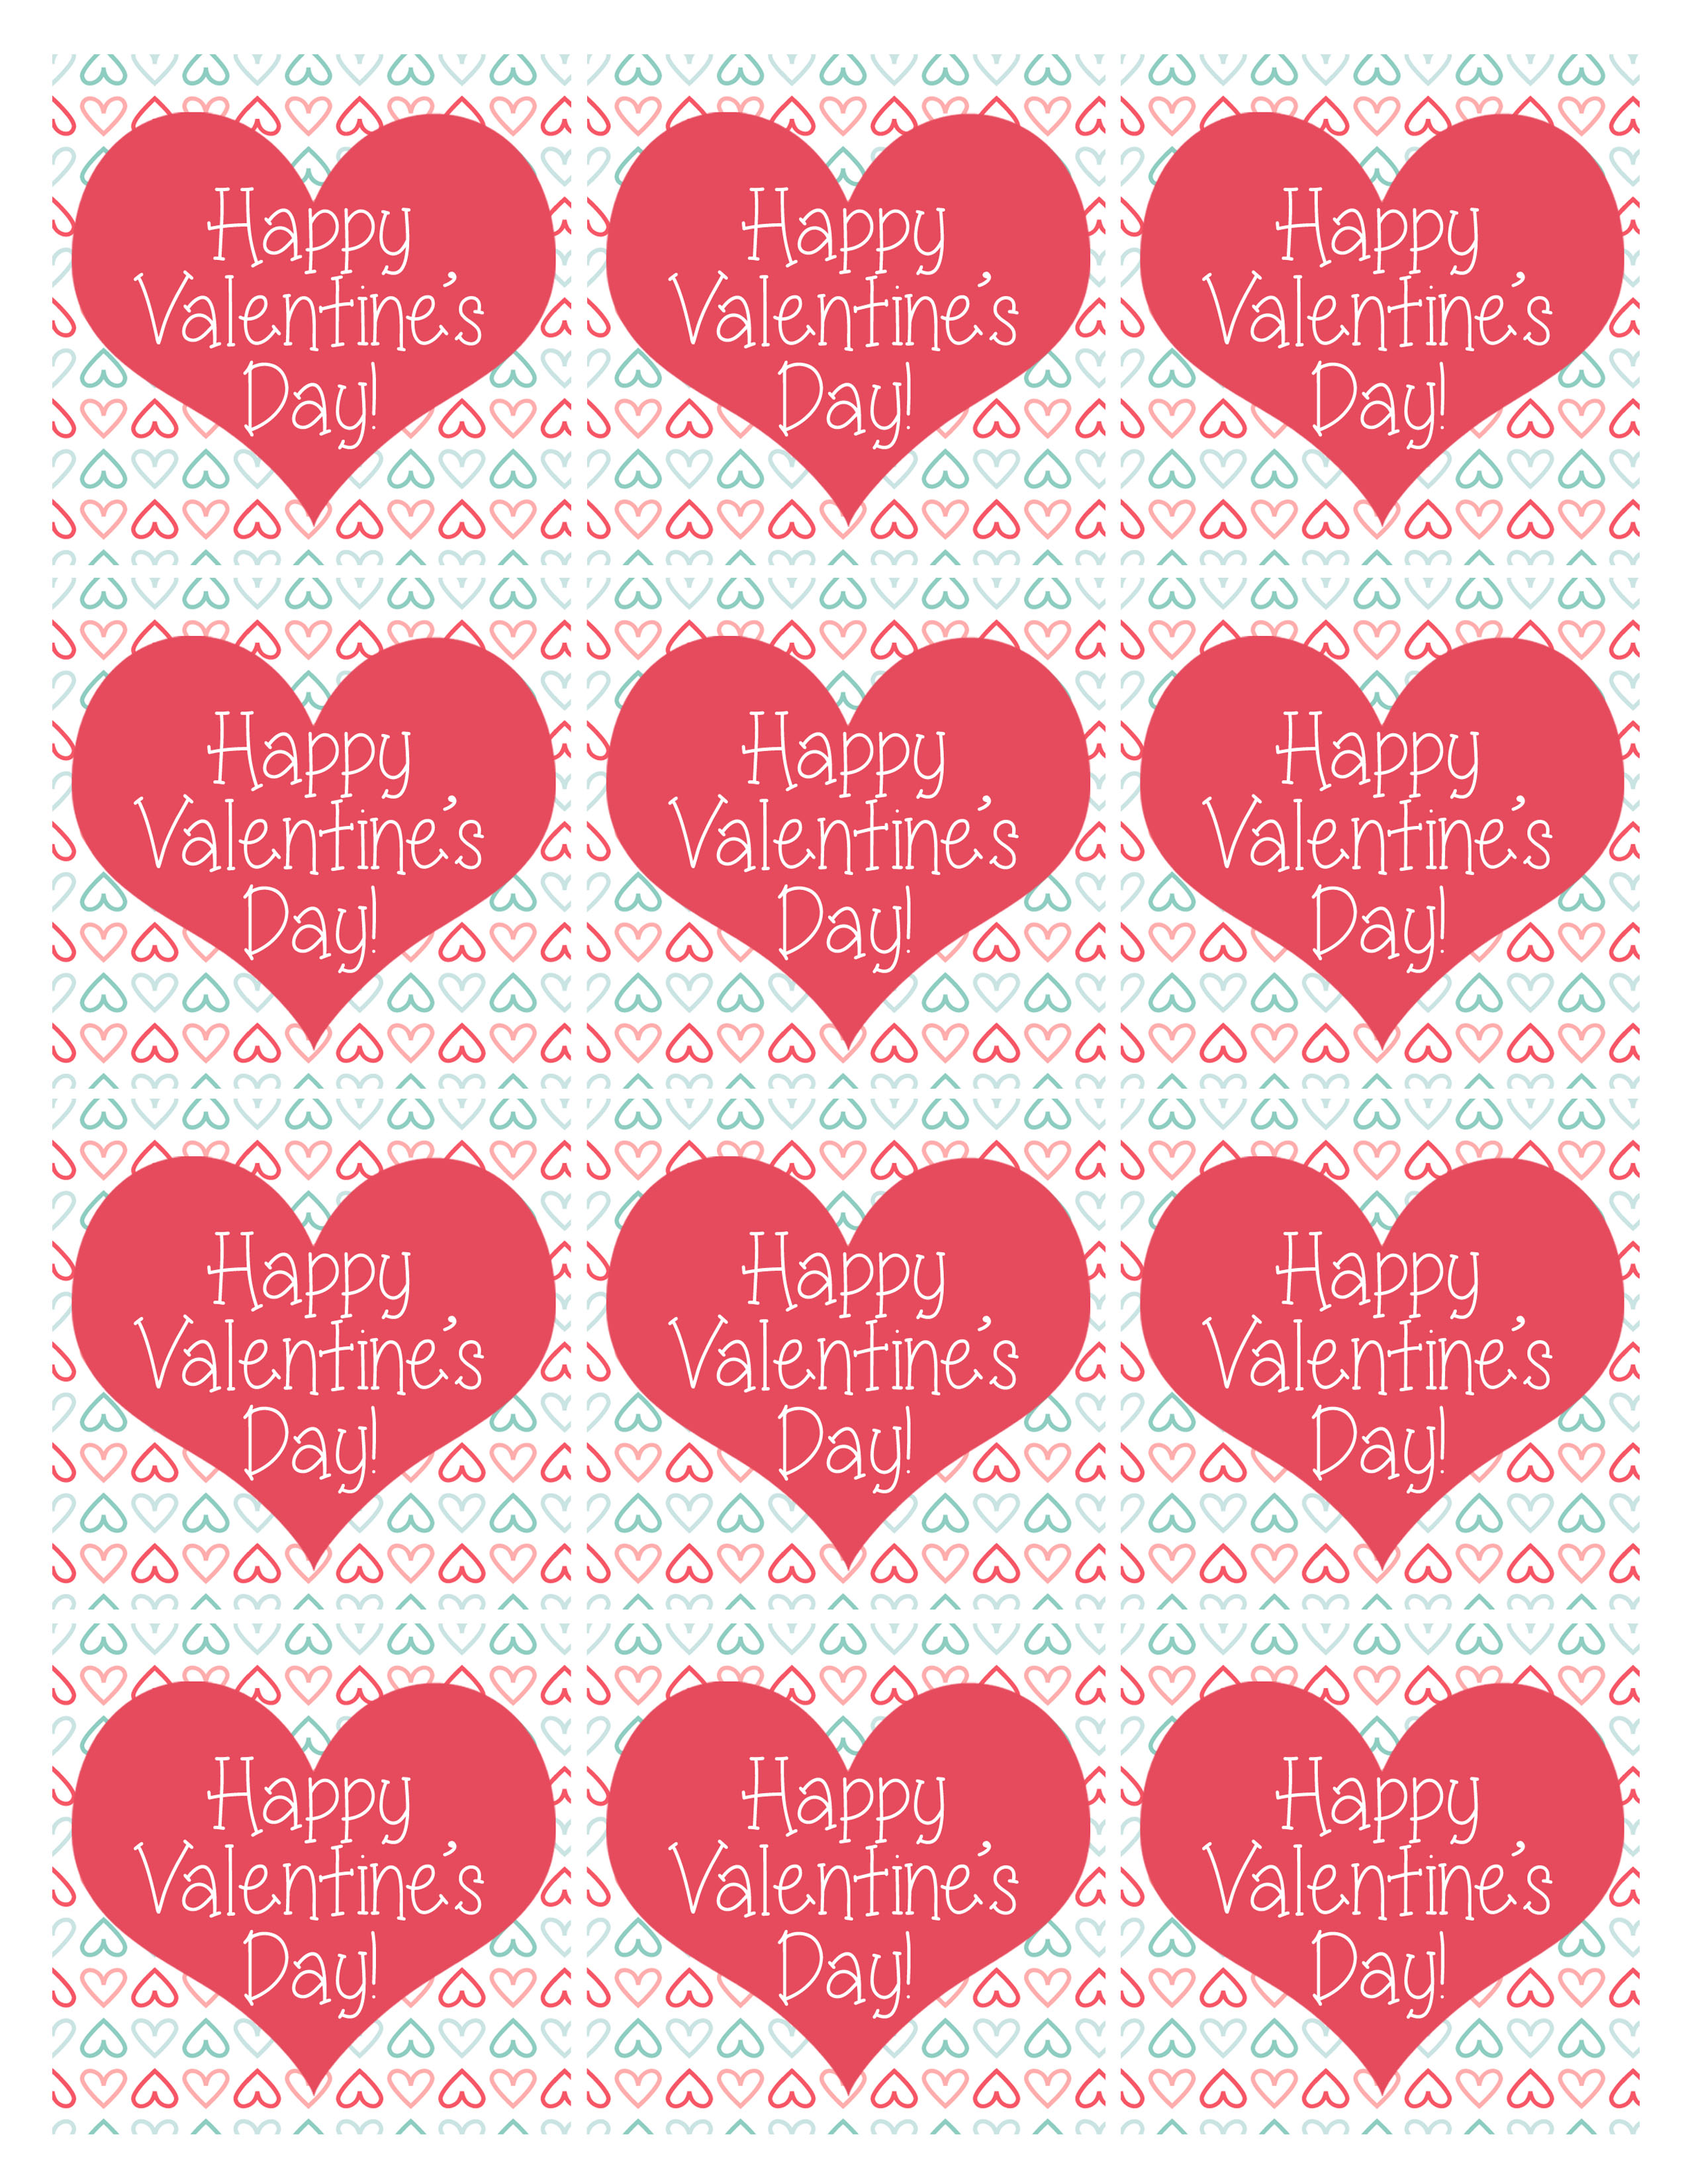 6 Best Images Of Happy Valentine s Day Printable Tag Valentine s Day